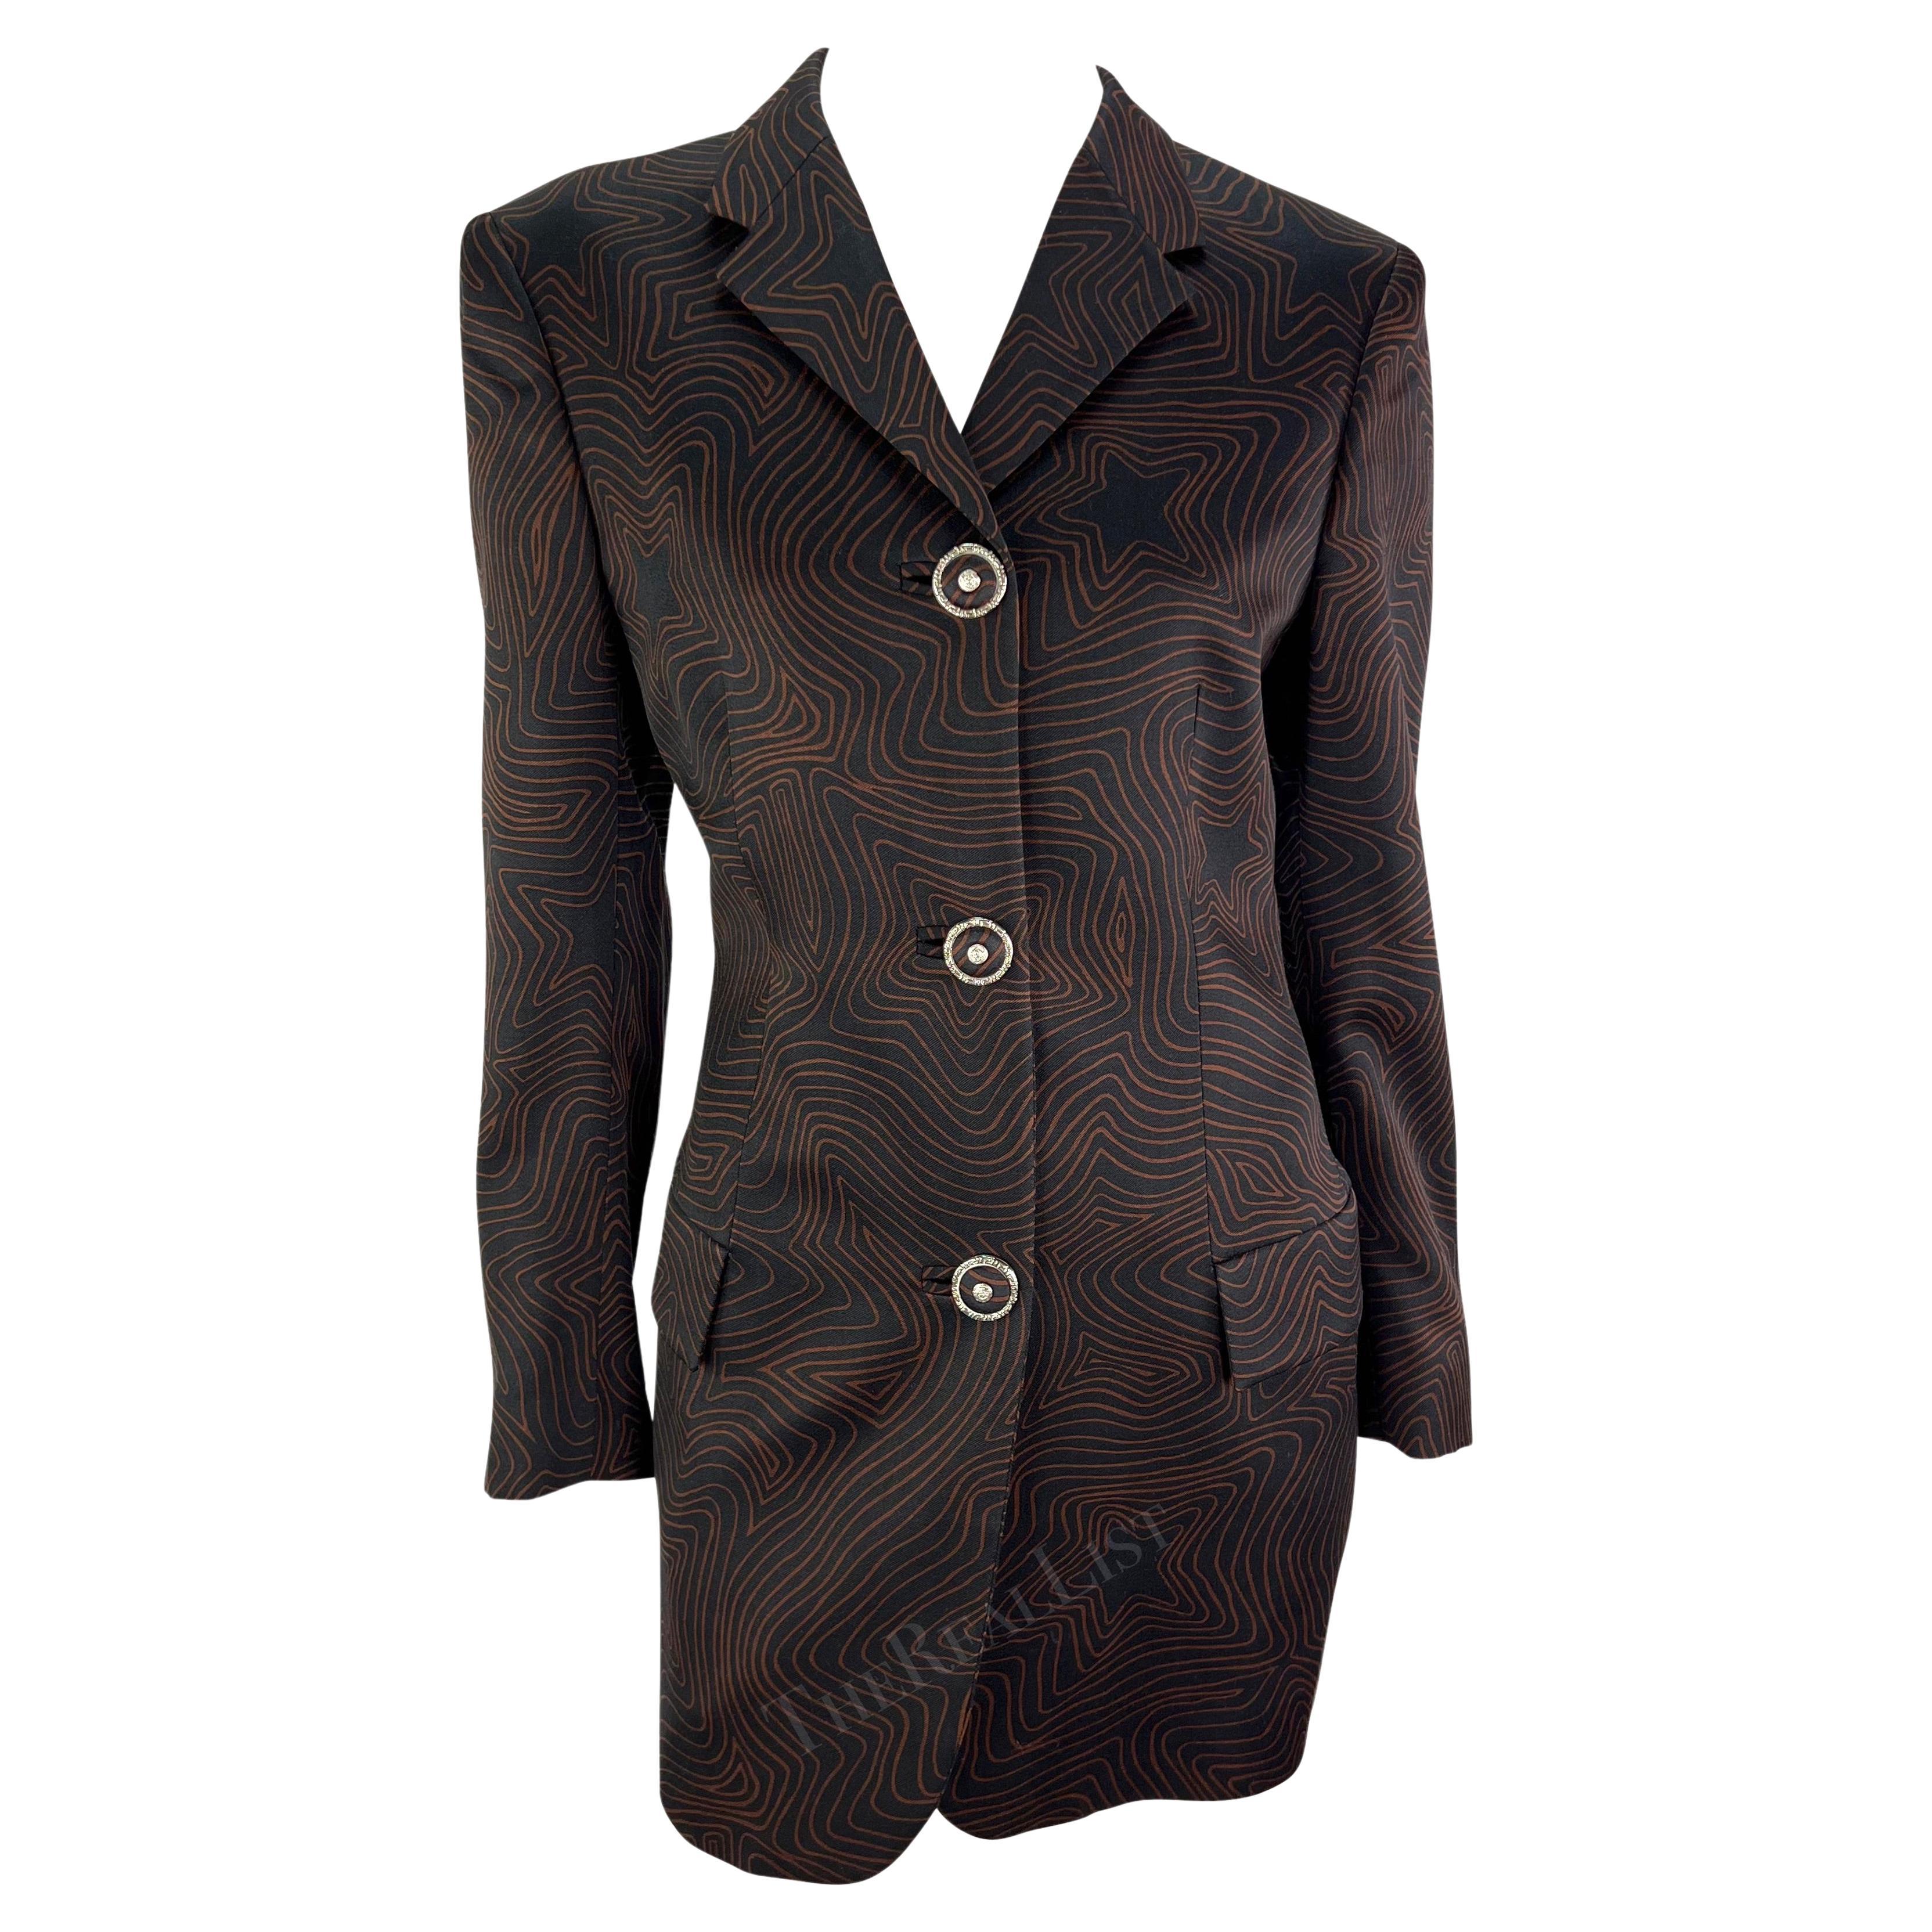 S/S 1996 Gianni Versace Black Brown Abstract Star Print Blazer For Sale